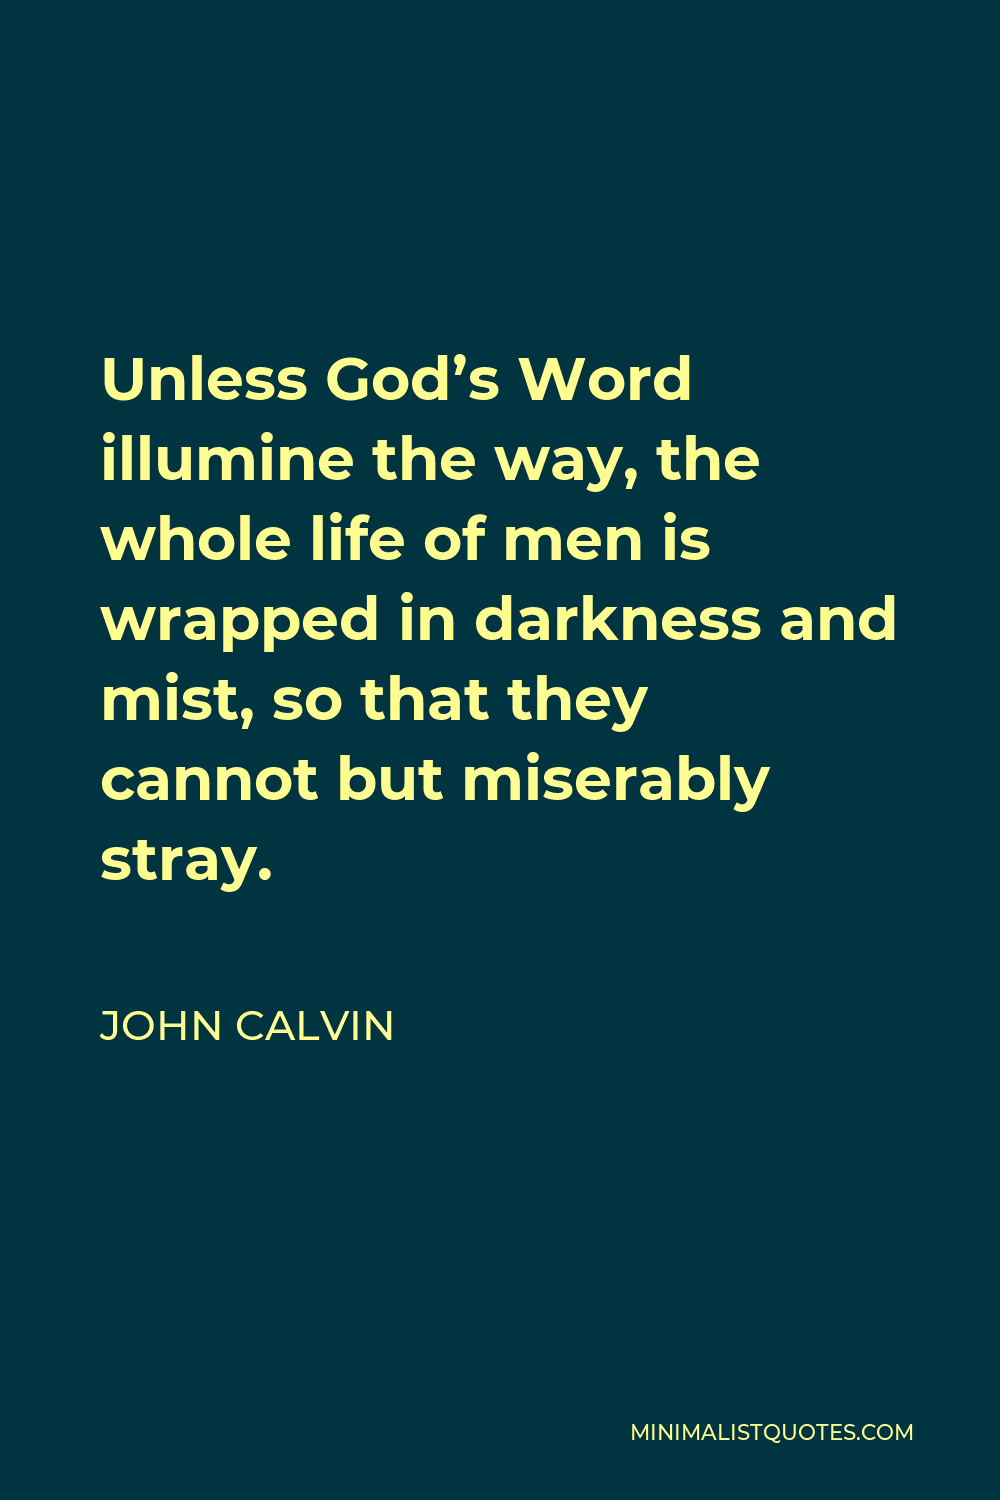 John Calvin Quote - Unless God’s Word illumine the way, the whole life of men is wrapped in darkness and mist, so that they cannot but miserably stray.